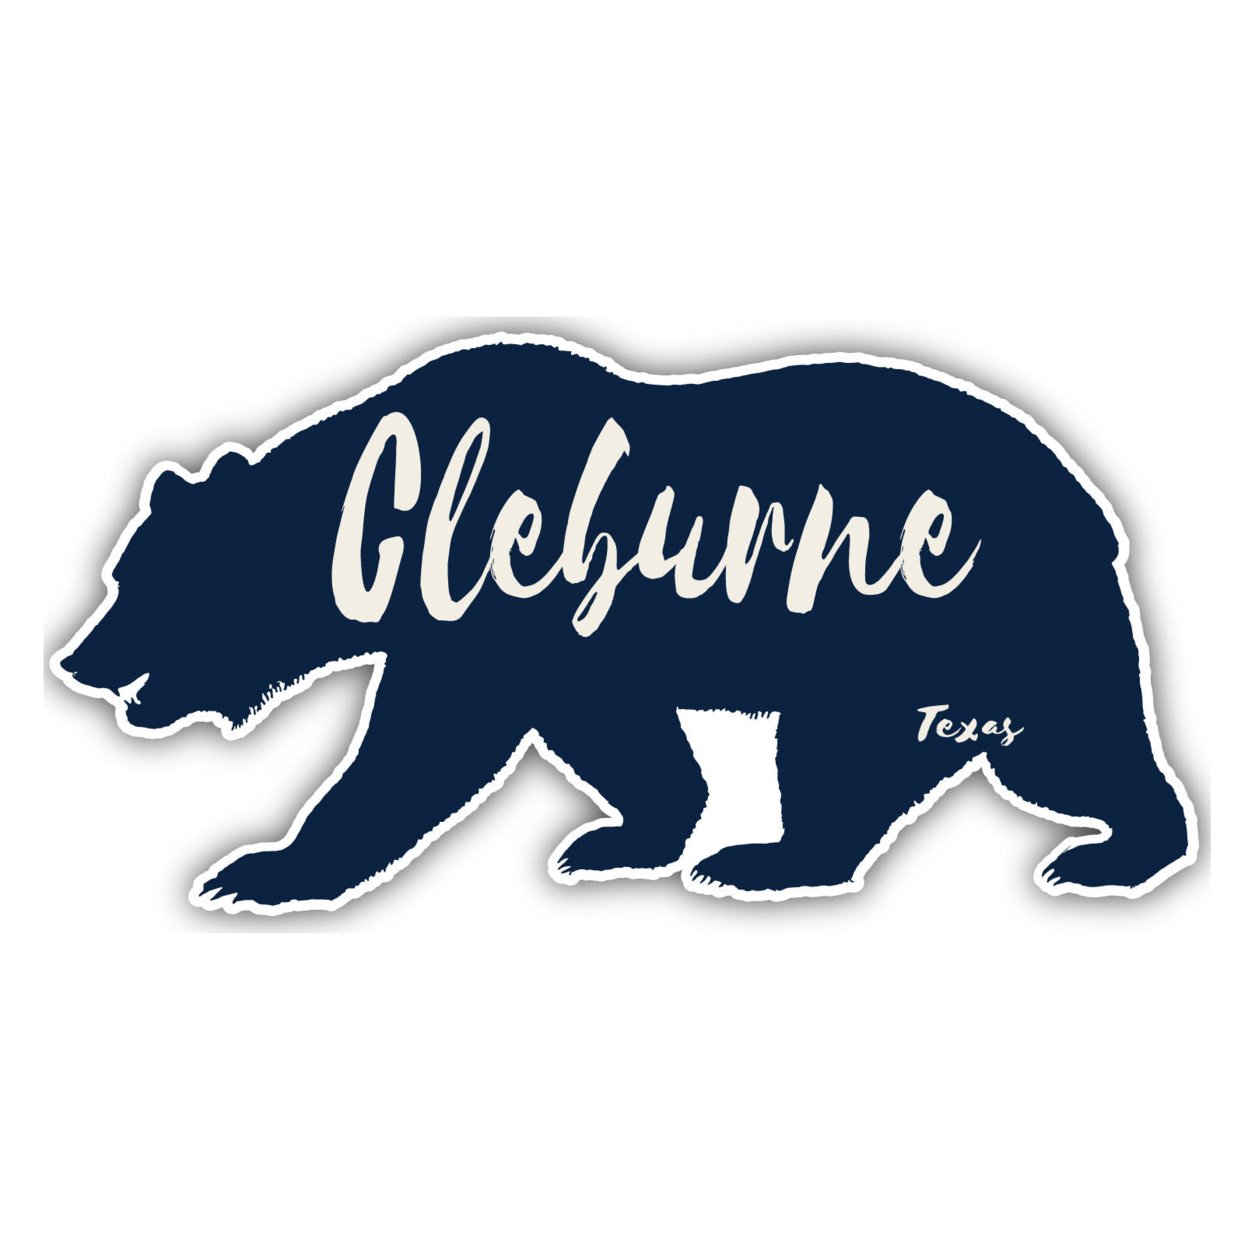 Cleburne Texas Souvenir Decorative Stickers (Choose Theme And Size) - 4-Pack, 12-Inch, Bear